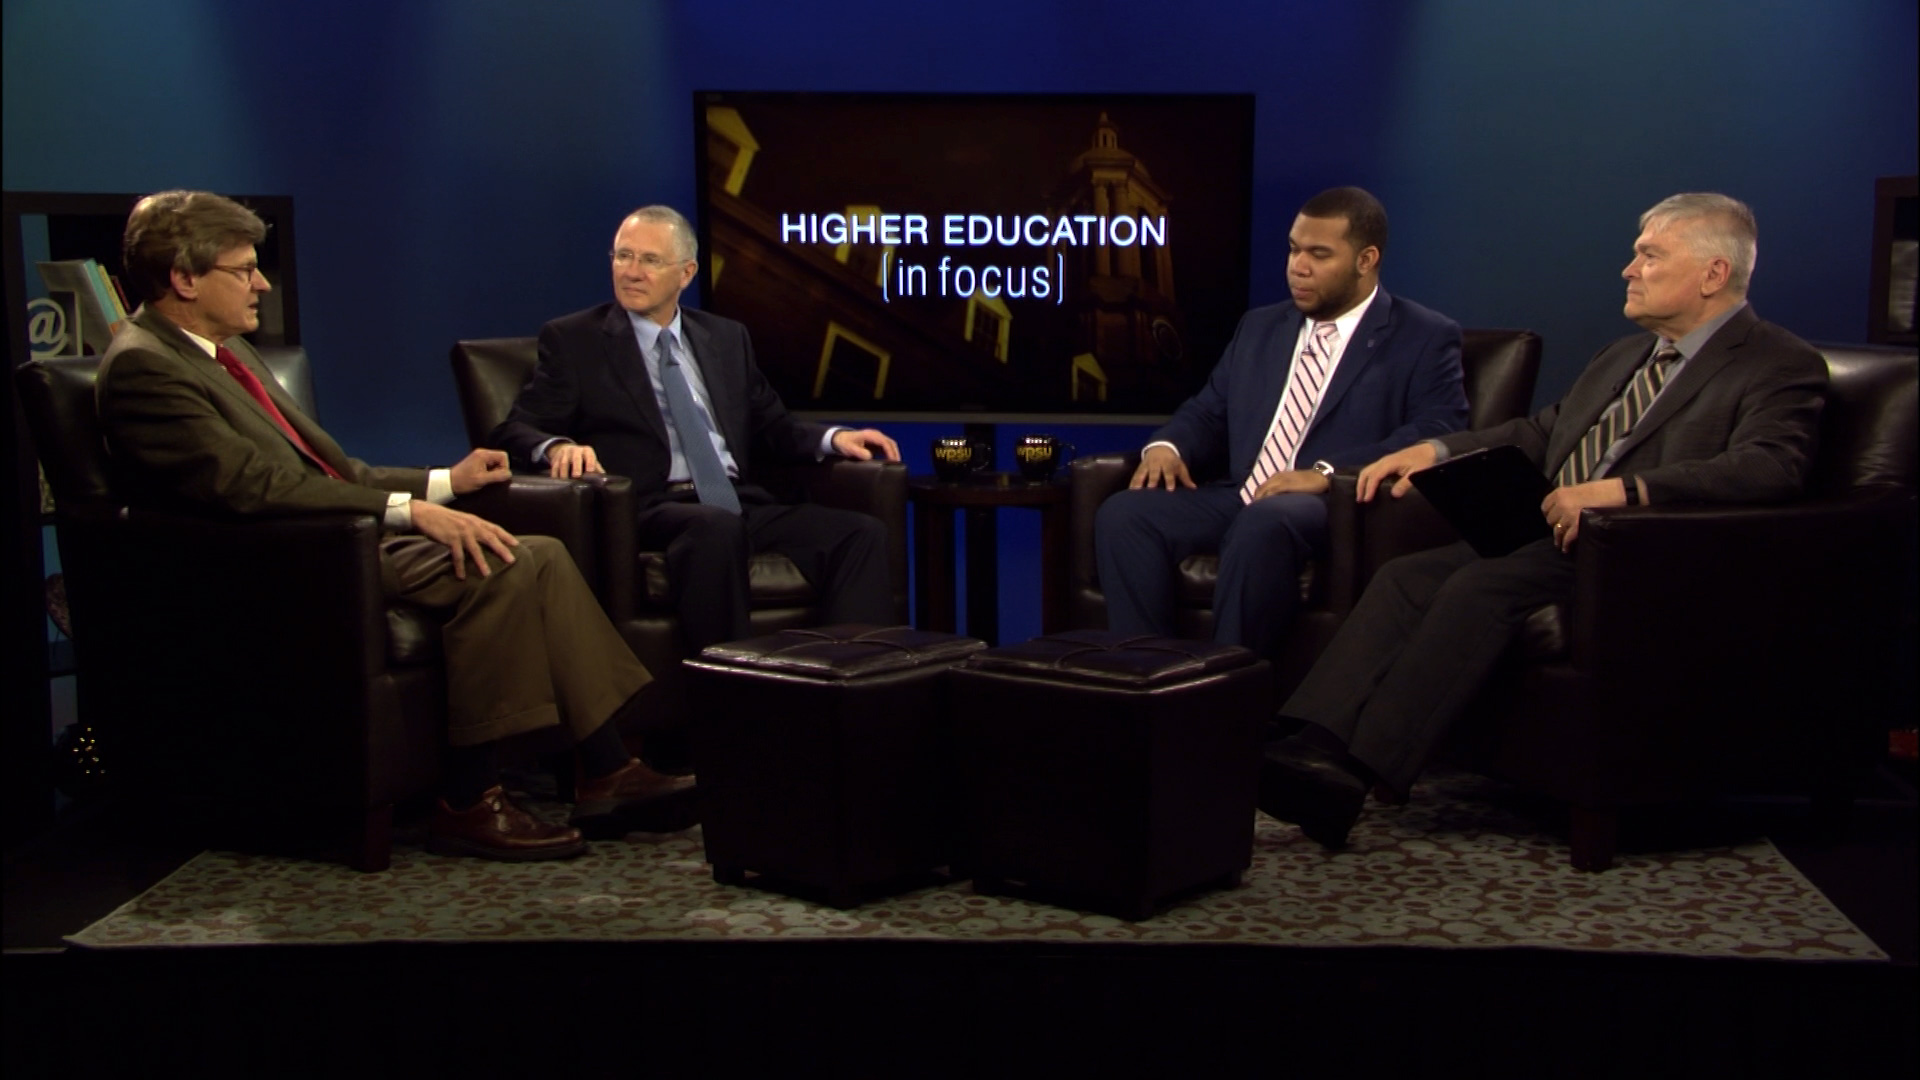 Penn State President Eric Barron and guests on the set of higher education in focus